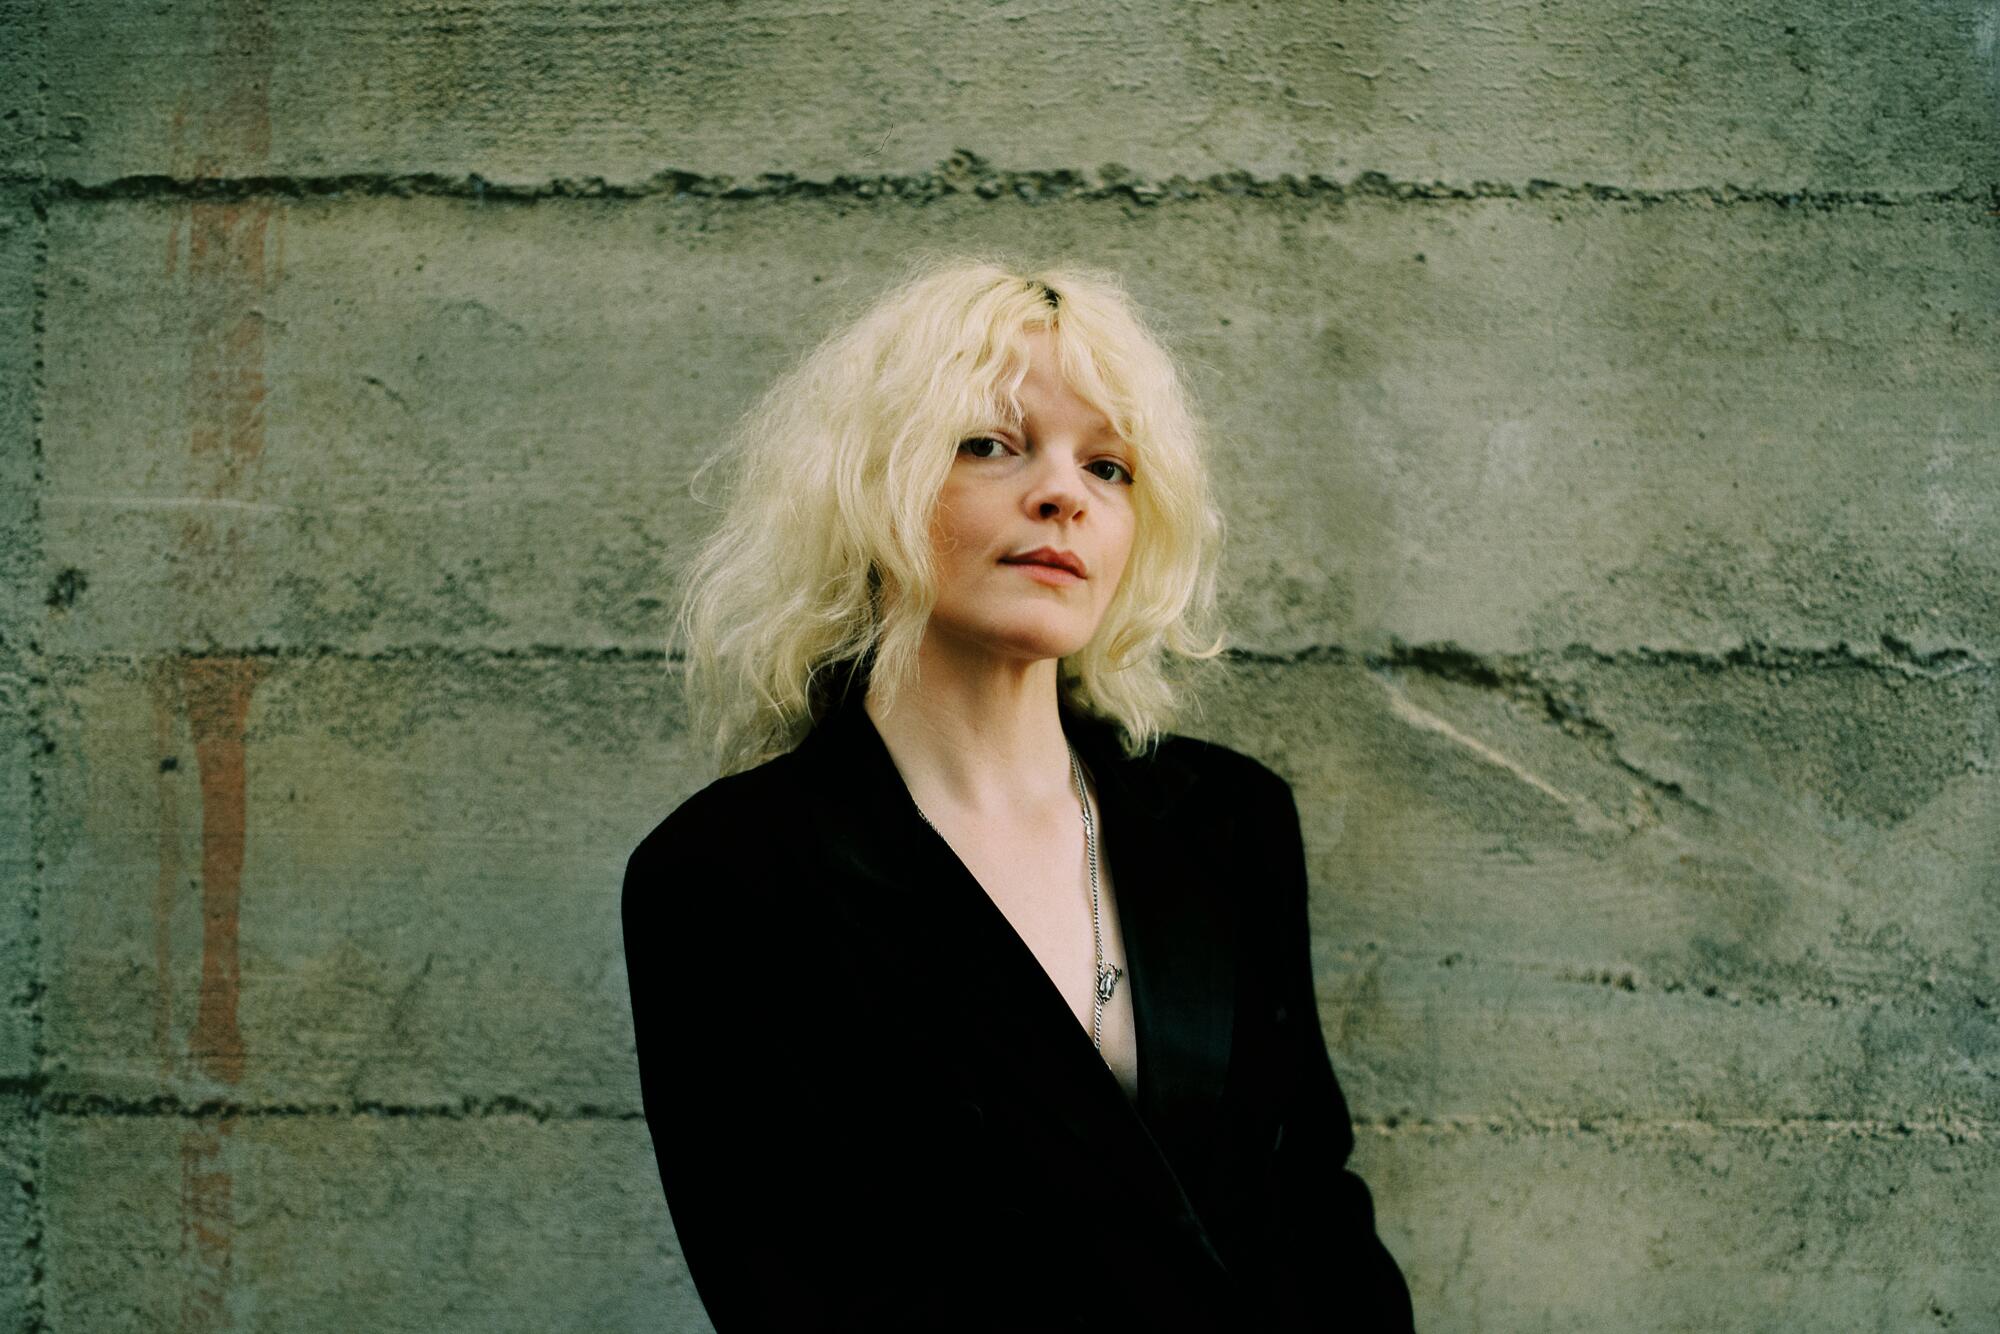 Blond woman in black jacket standing in front of a gray wall